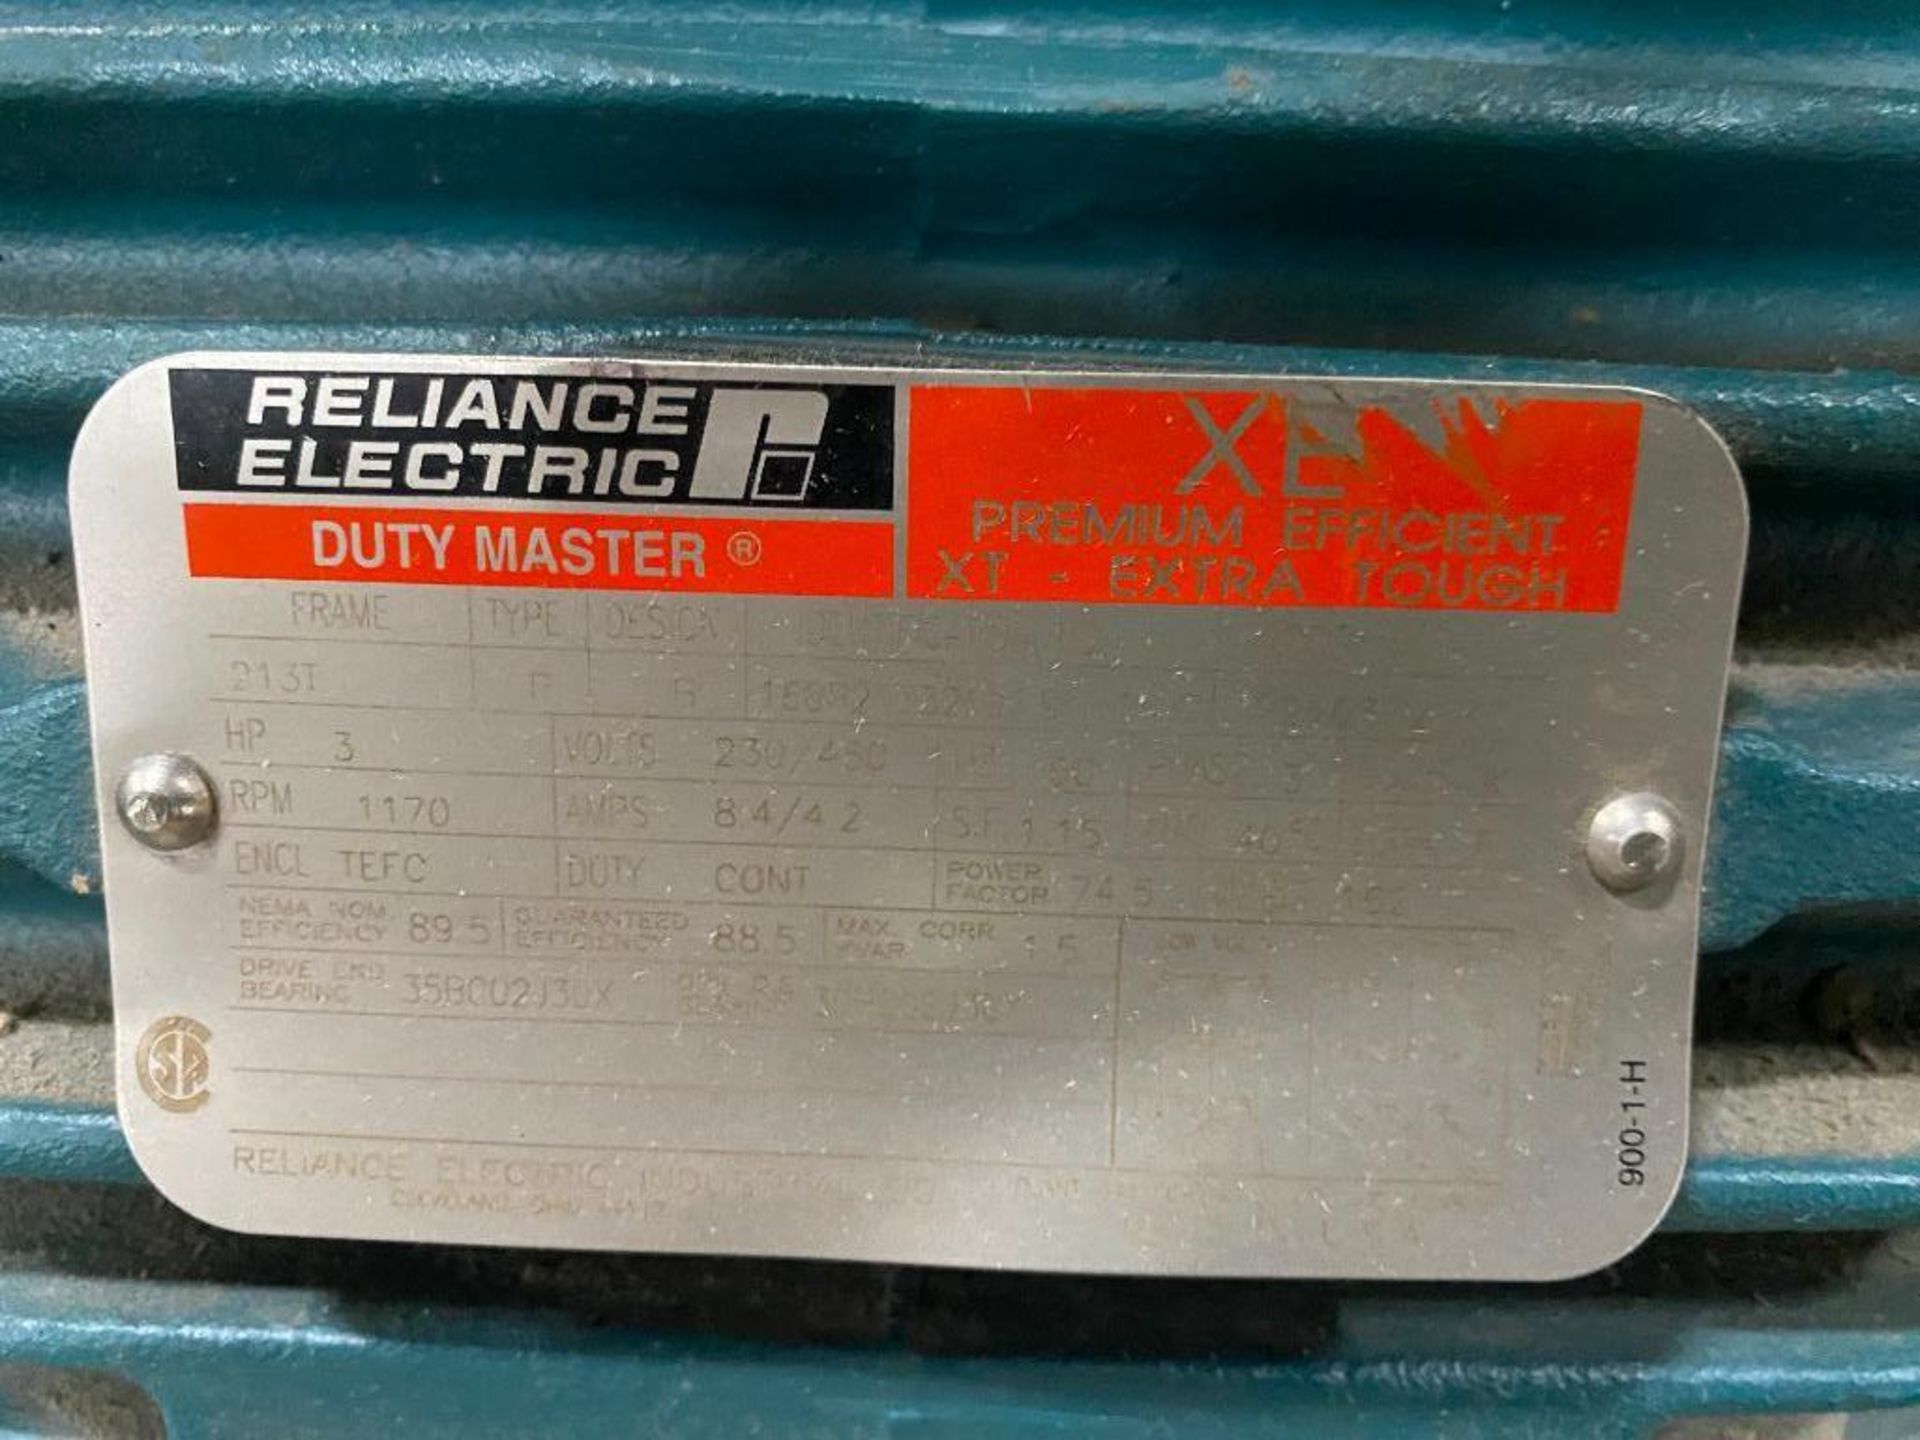 Reliance 3 HP Electric Motor, 230/460 V, 1170 RPM, 60 Hz, 213T Frame, 3 PH - Image 2 of 2